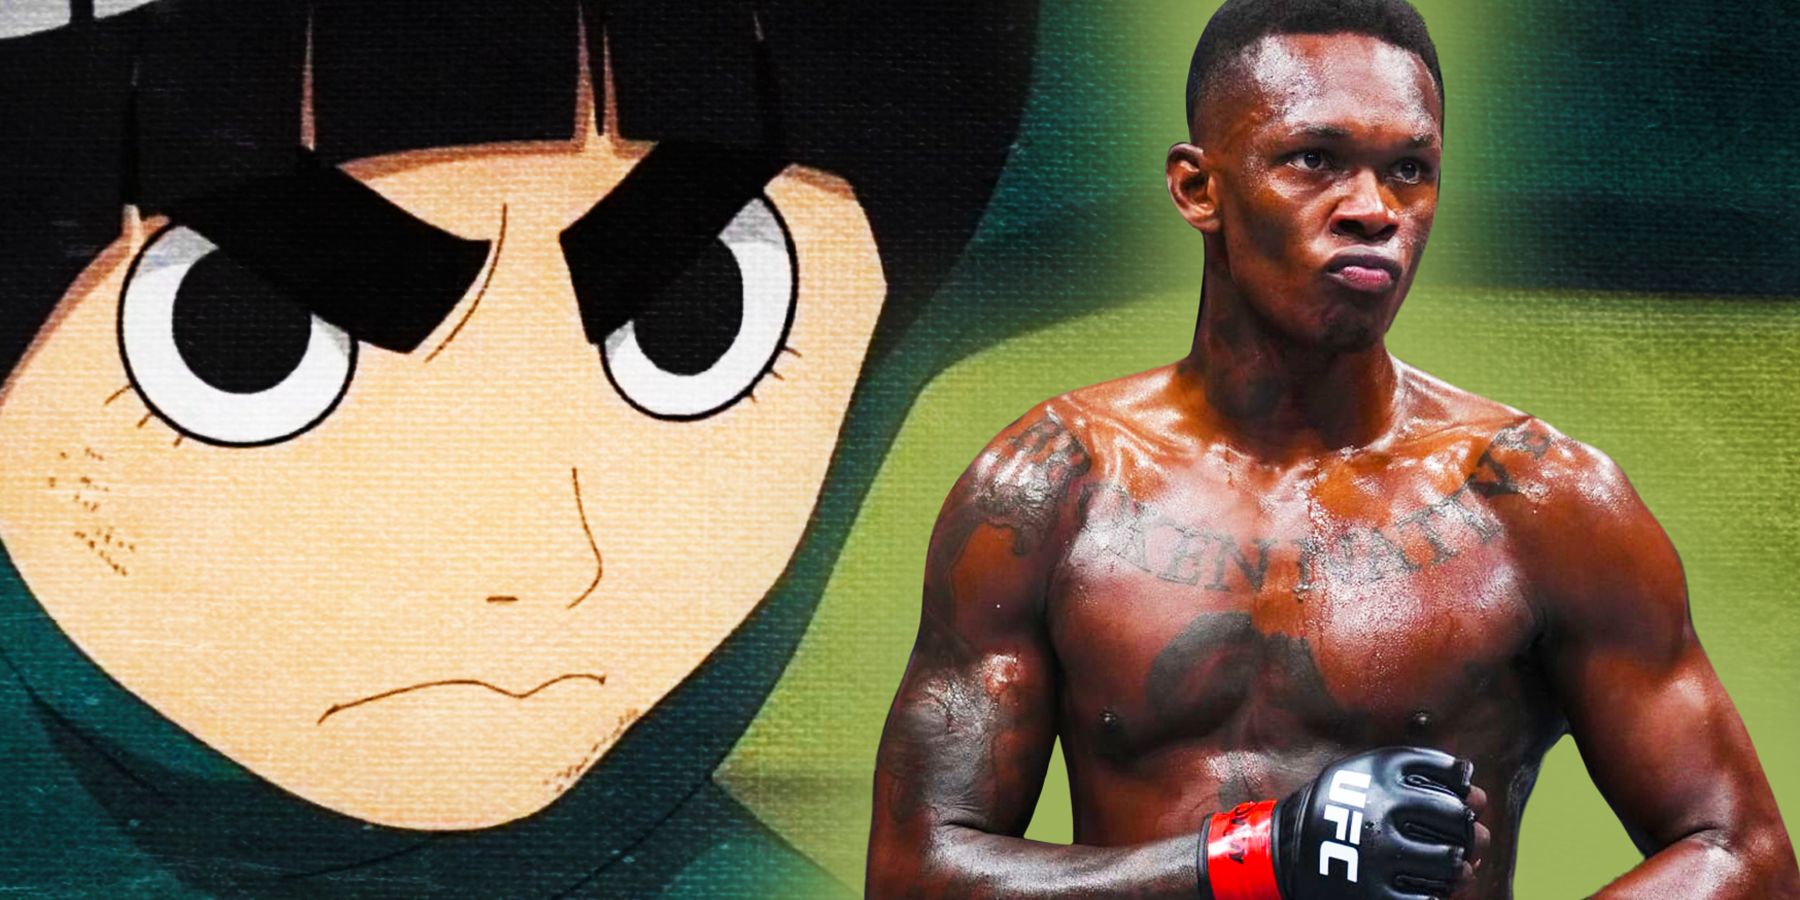 UFC's Israel Adesanya uses Rock Lee's iconic stance from Naruto